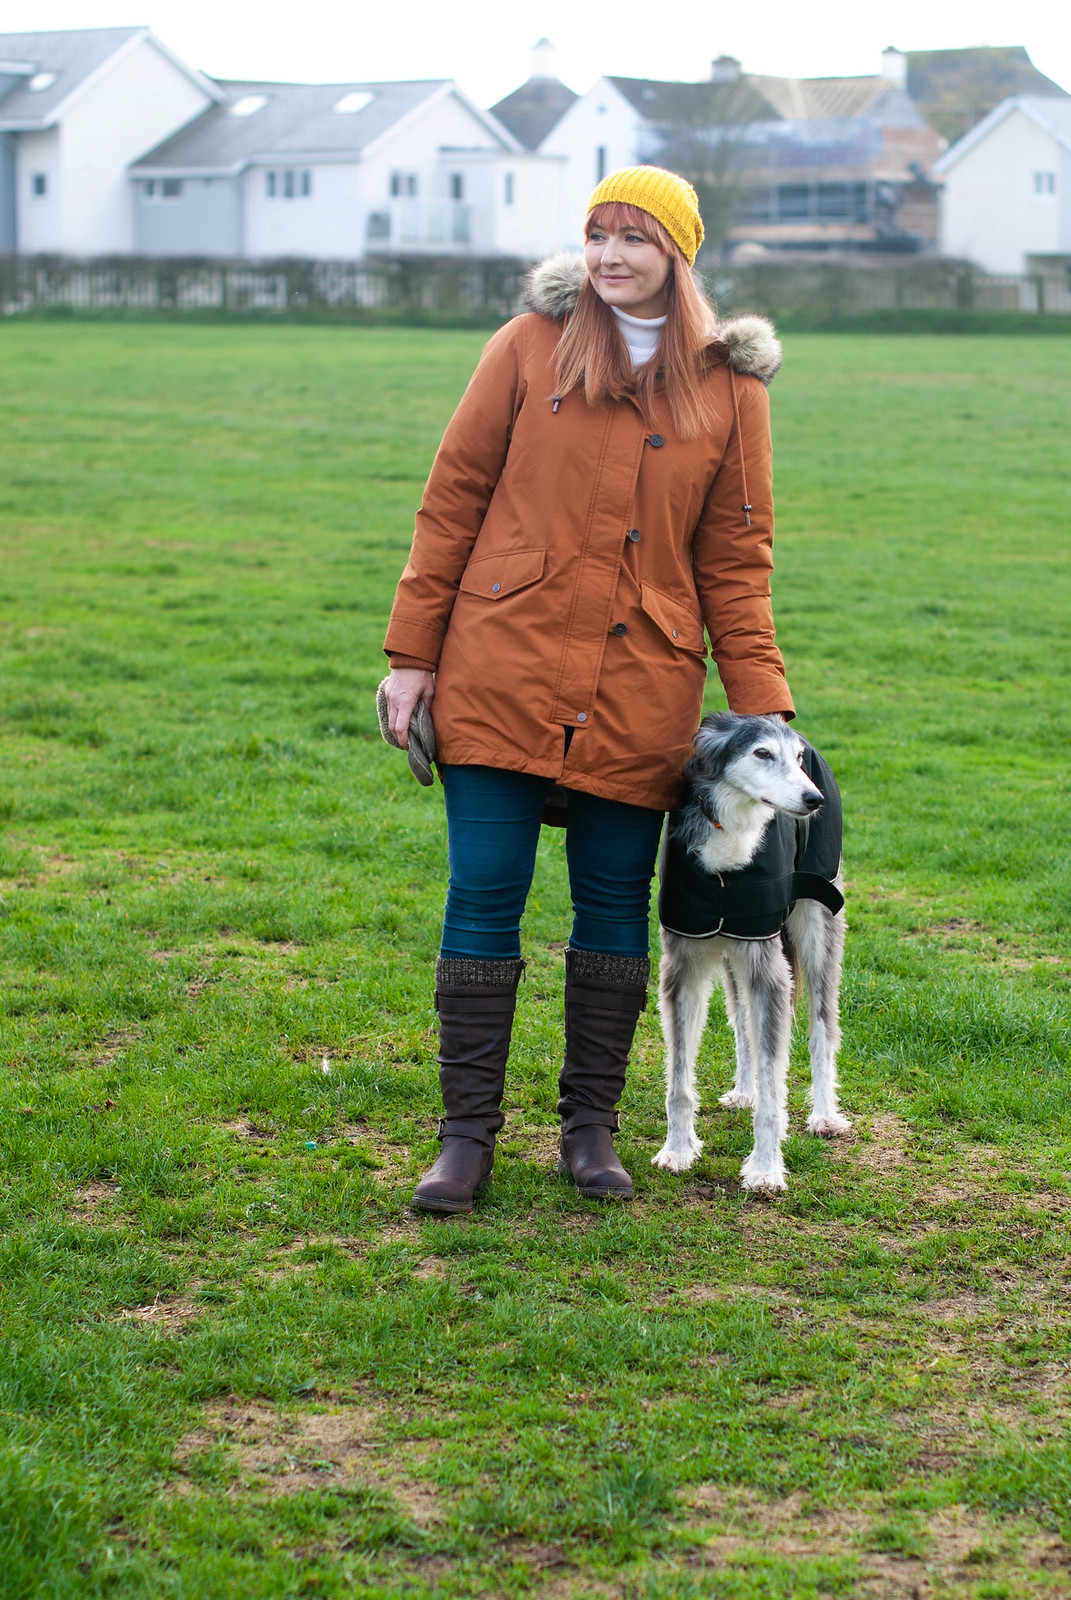 A Colourful, Stylish Walking the Dog Outfit With Crazy-Comfy Boots \ orange-brown parka \ knee high brown boots \ yellow beanie | Not Dressed As Lamb, over 40 style